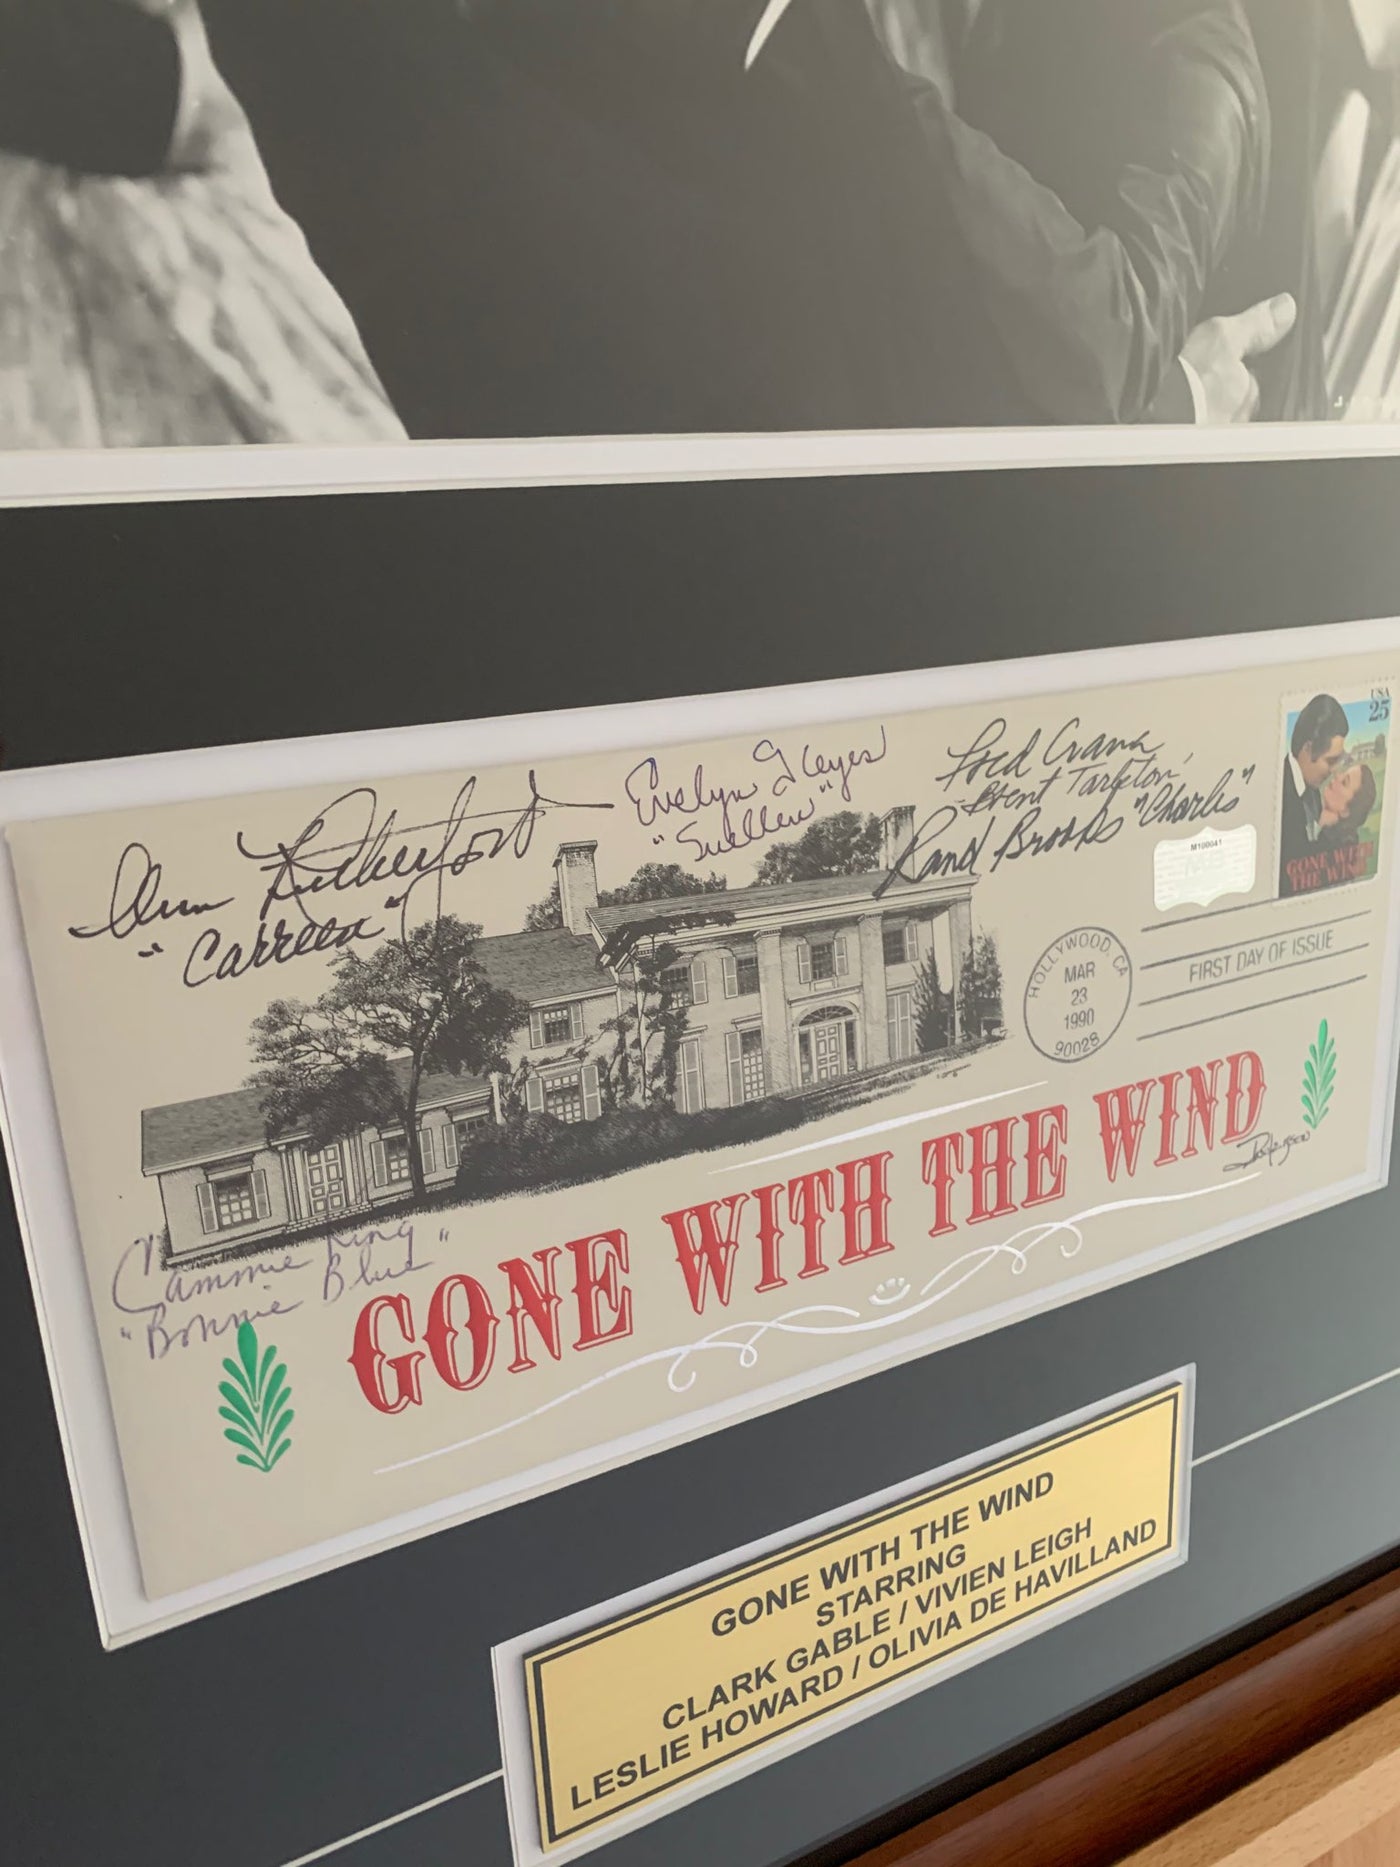 Ann Rutherford Evelyn Keys Cammie King Fred Crane Rand Brooks Signed Gone with the Wind Framed With full Certificate Of Authenticity